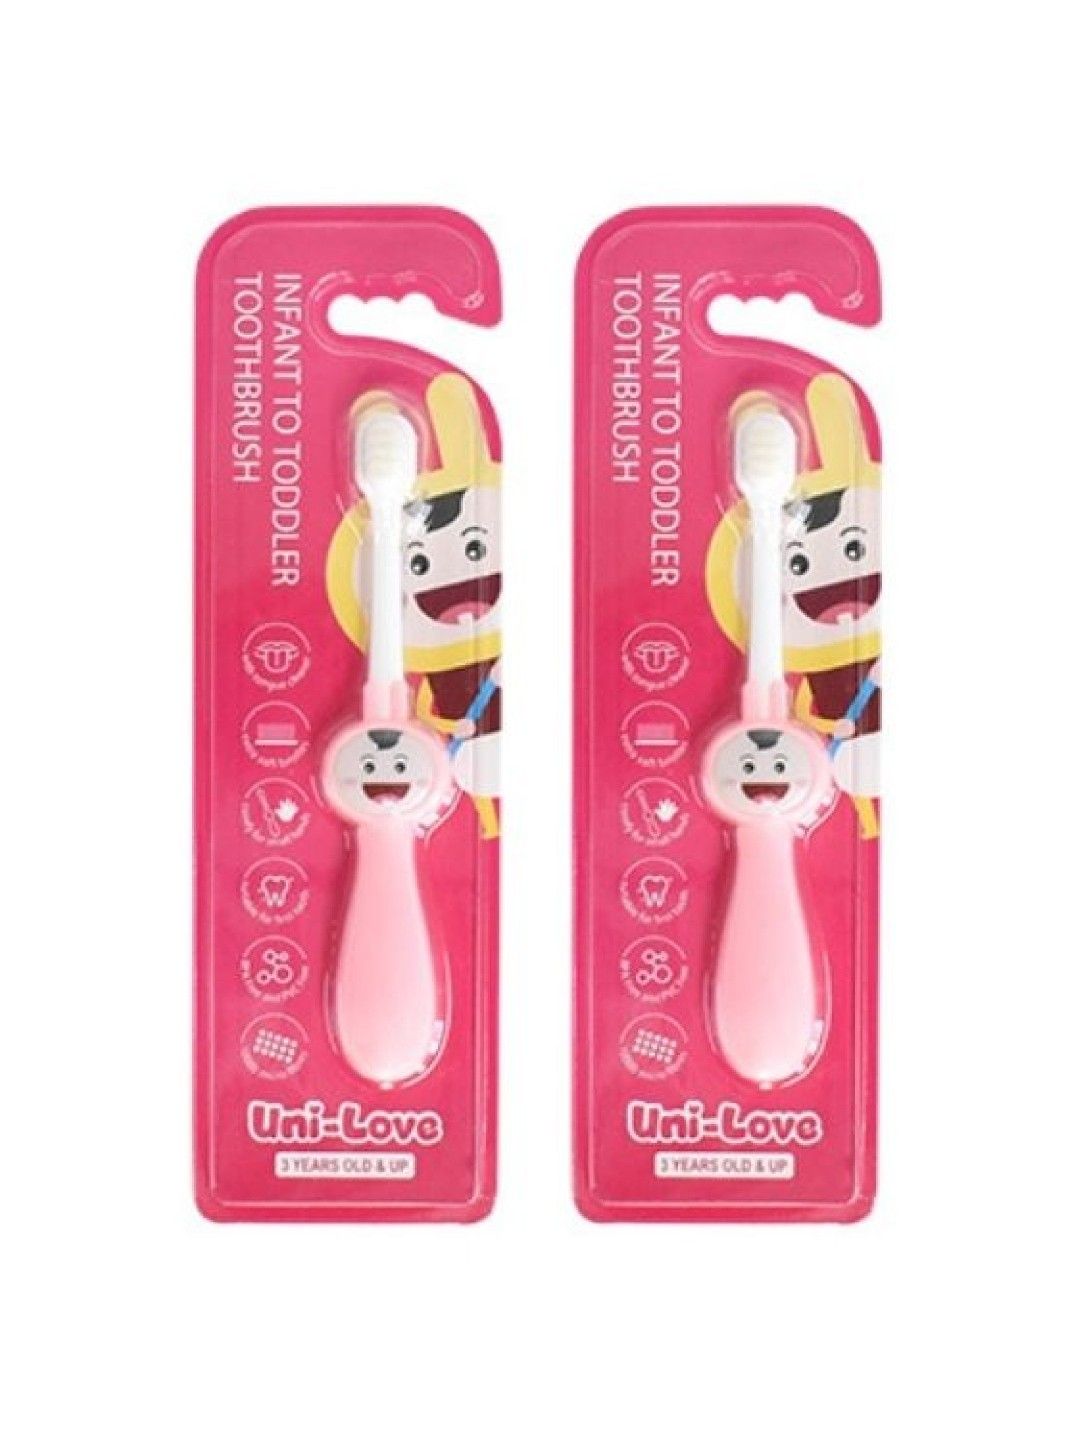 Uni-love Infant to Toddler Toothbrush (2-Pack)